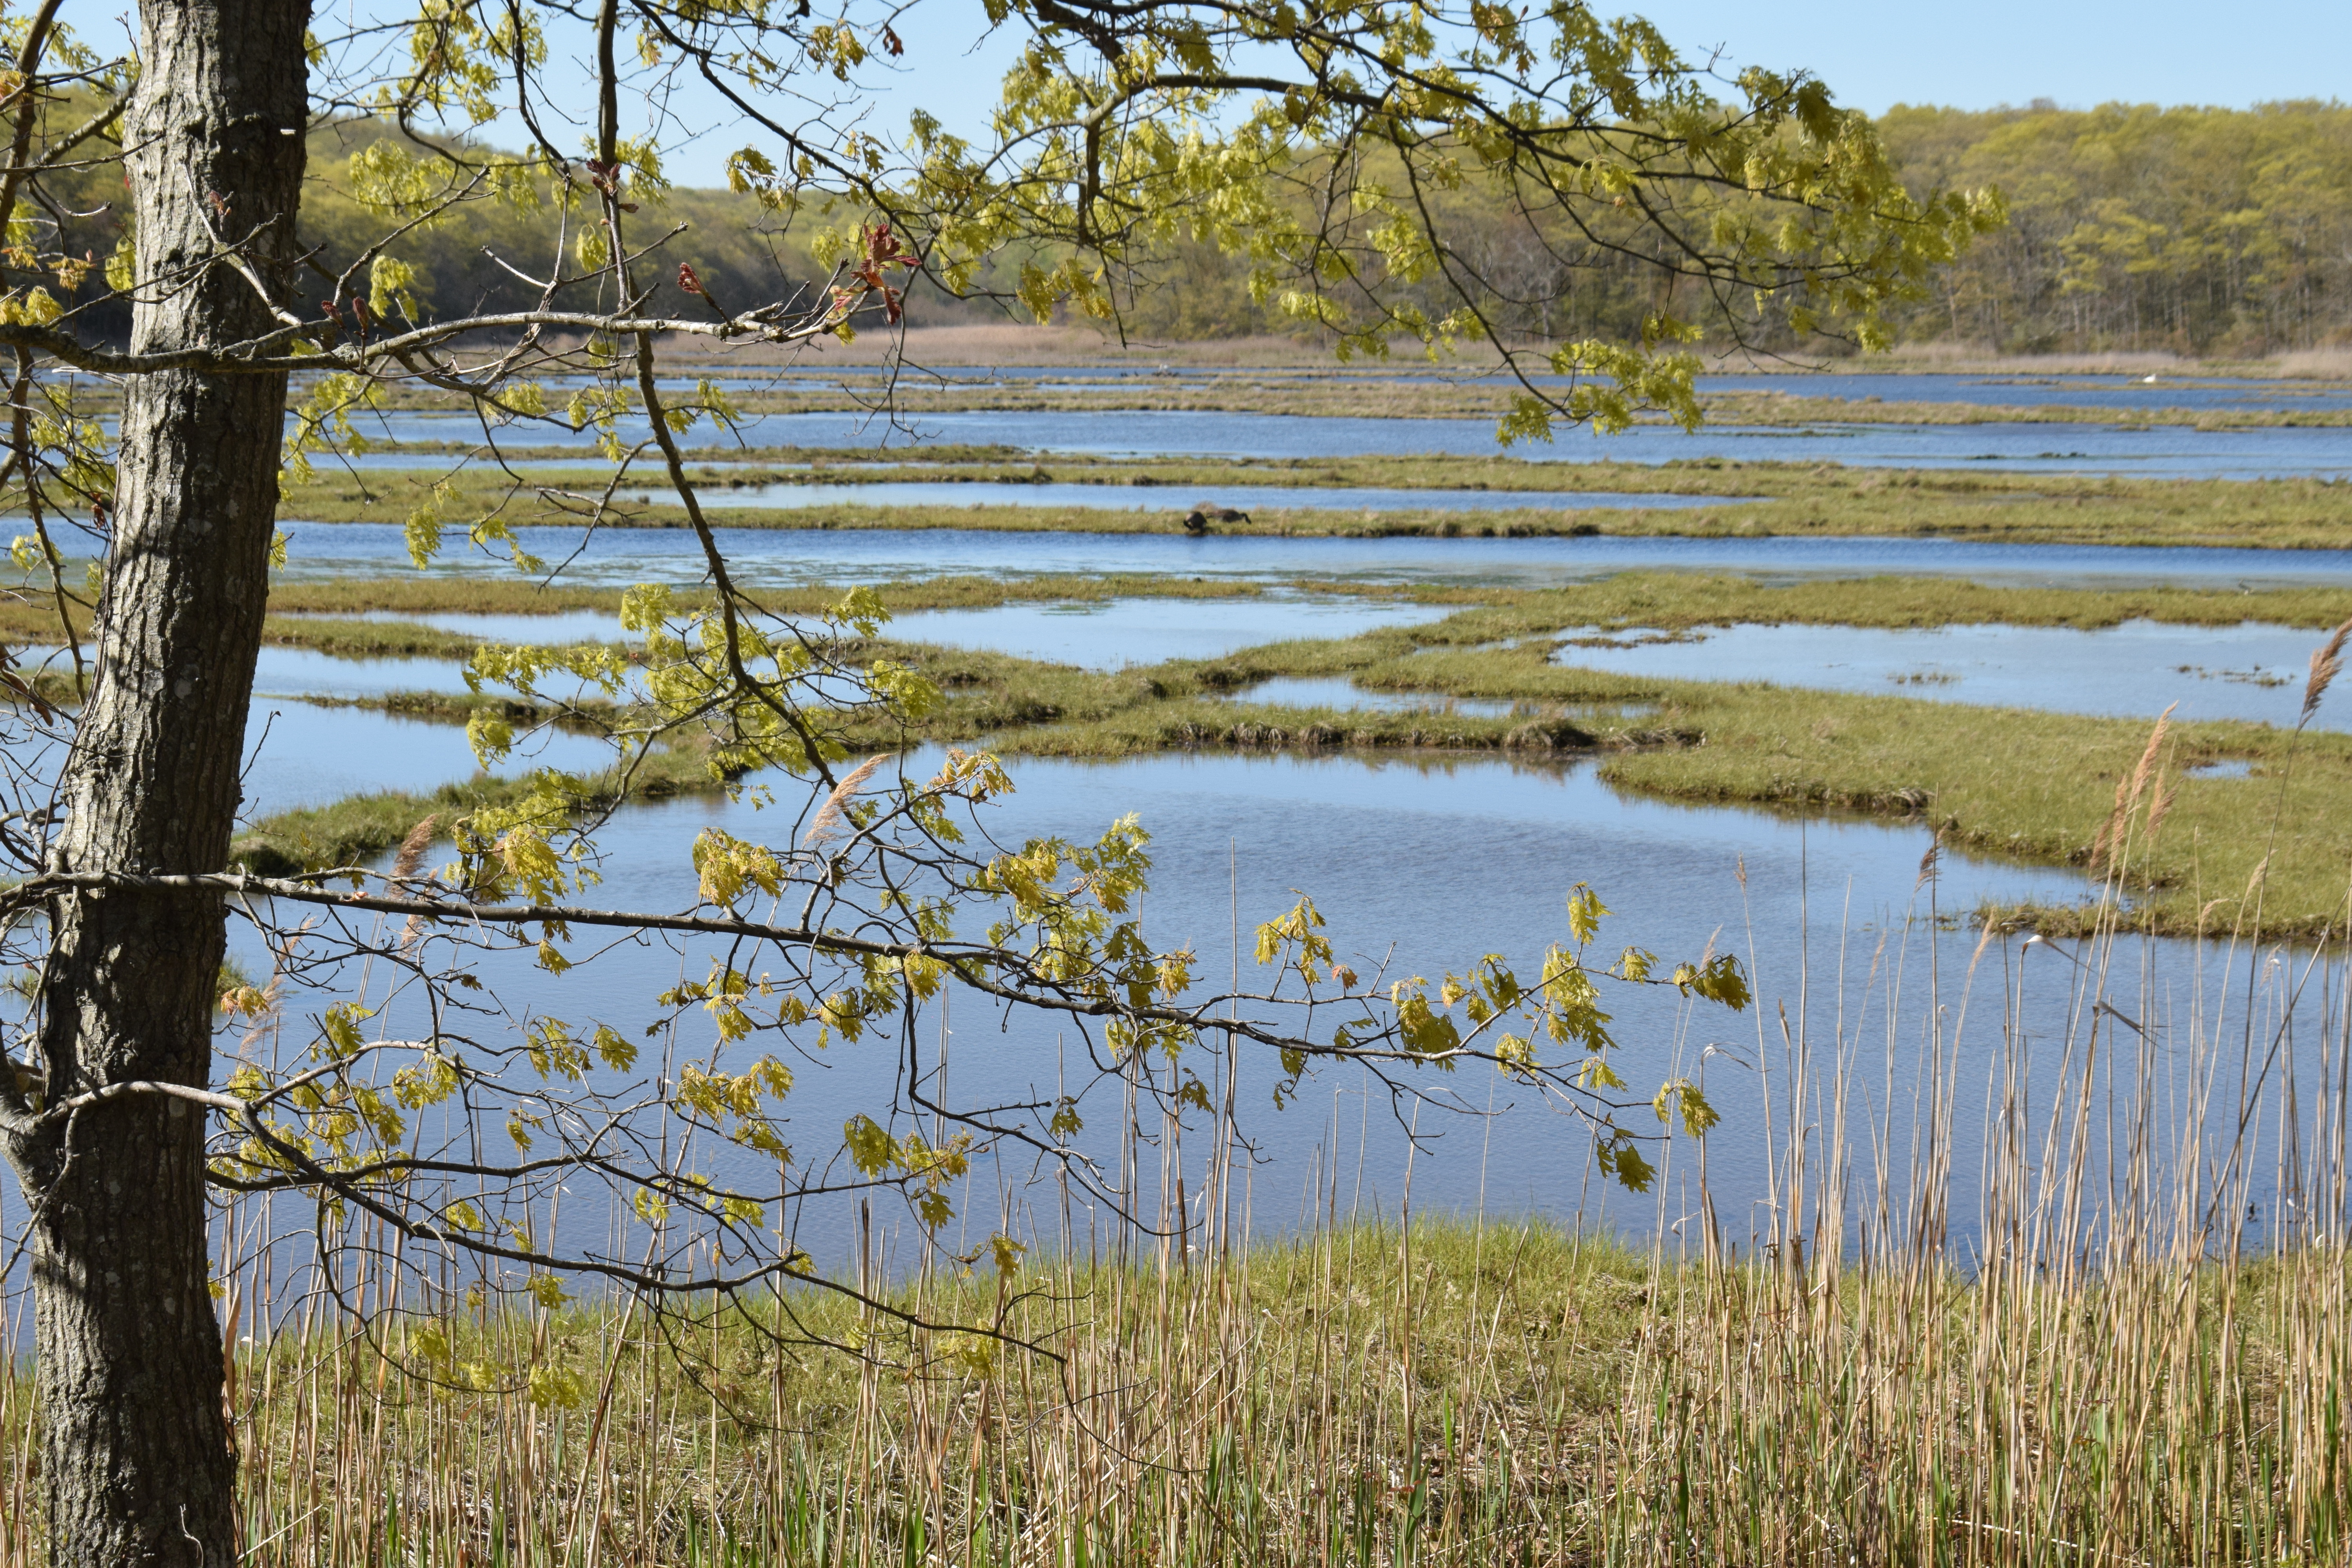 It's the Weekend, Number 107, Spring weekend in a marsh on the CT coast